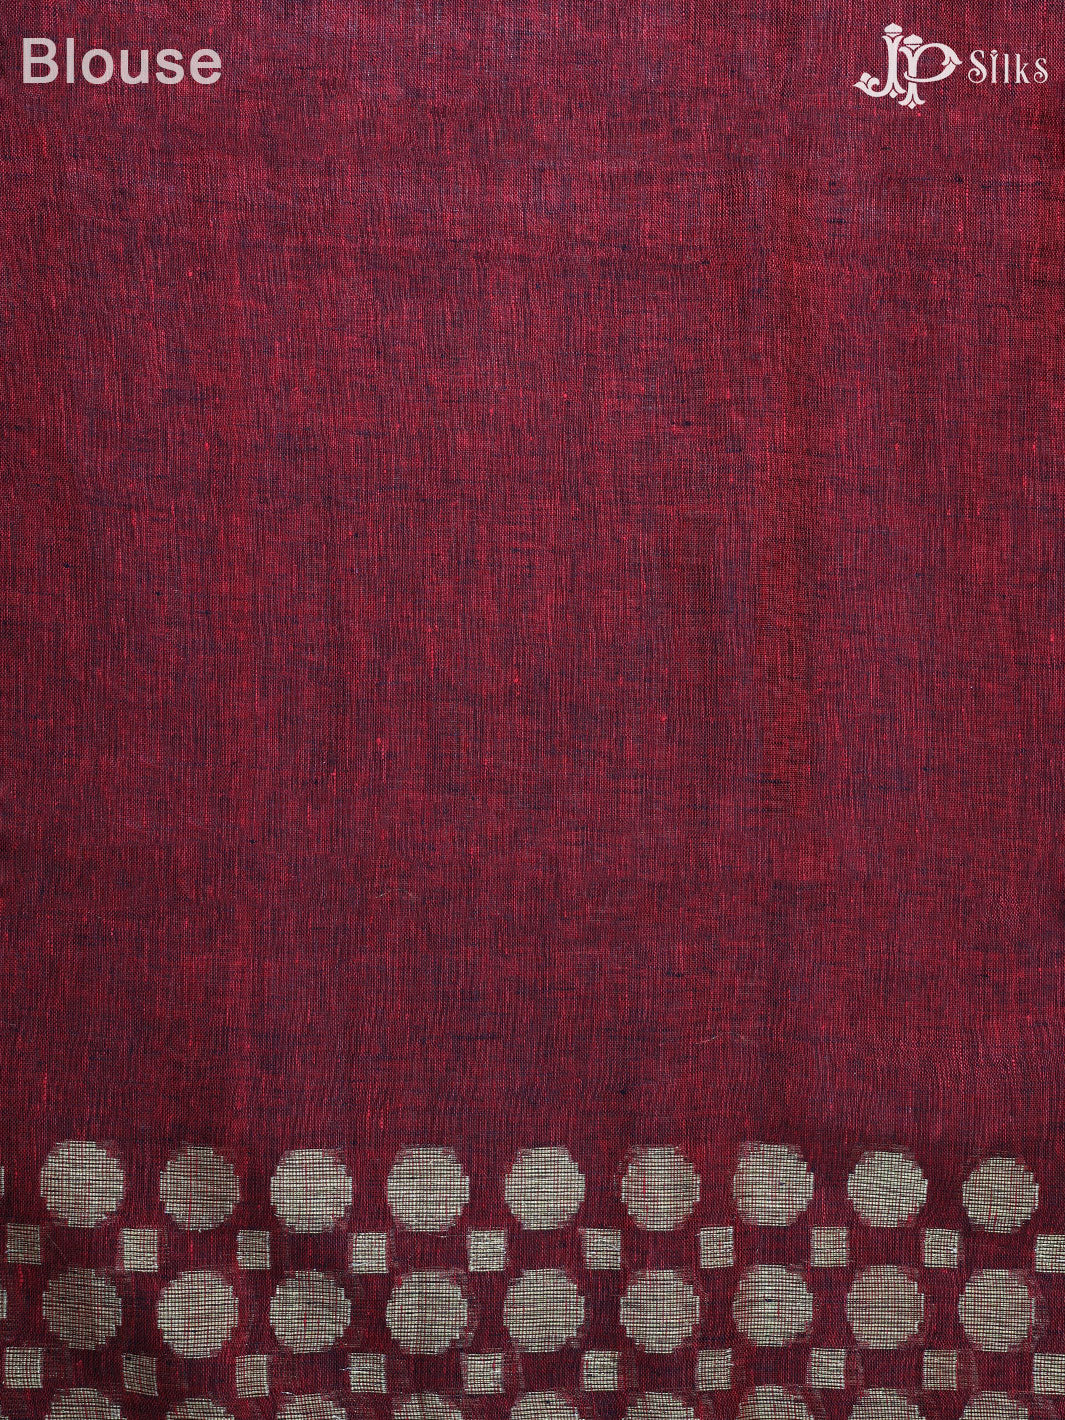 Maroon and Gold Linen Fancy Saree - D8330 - View 2